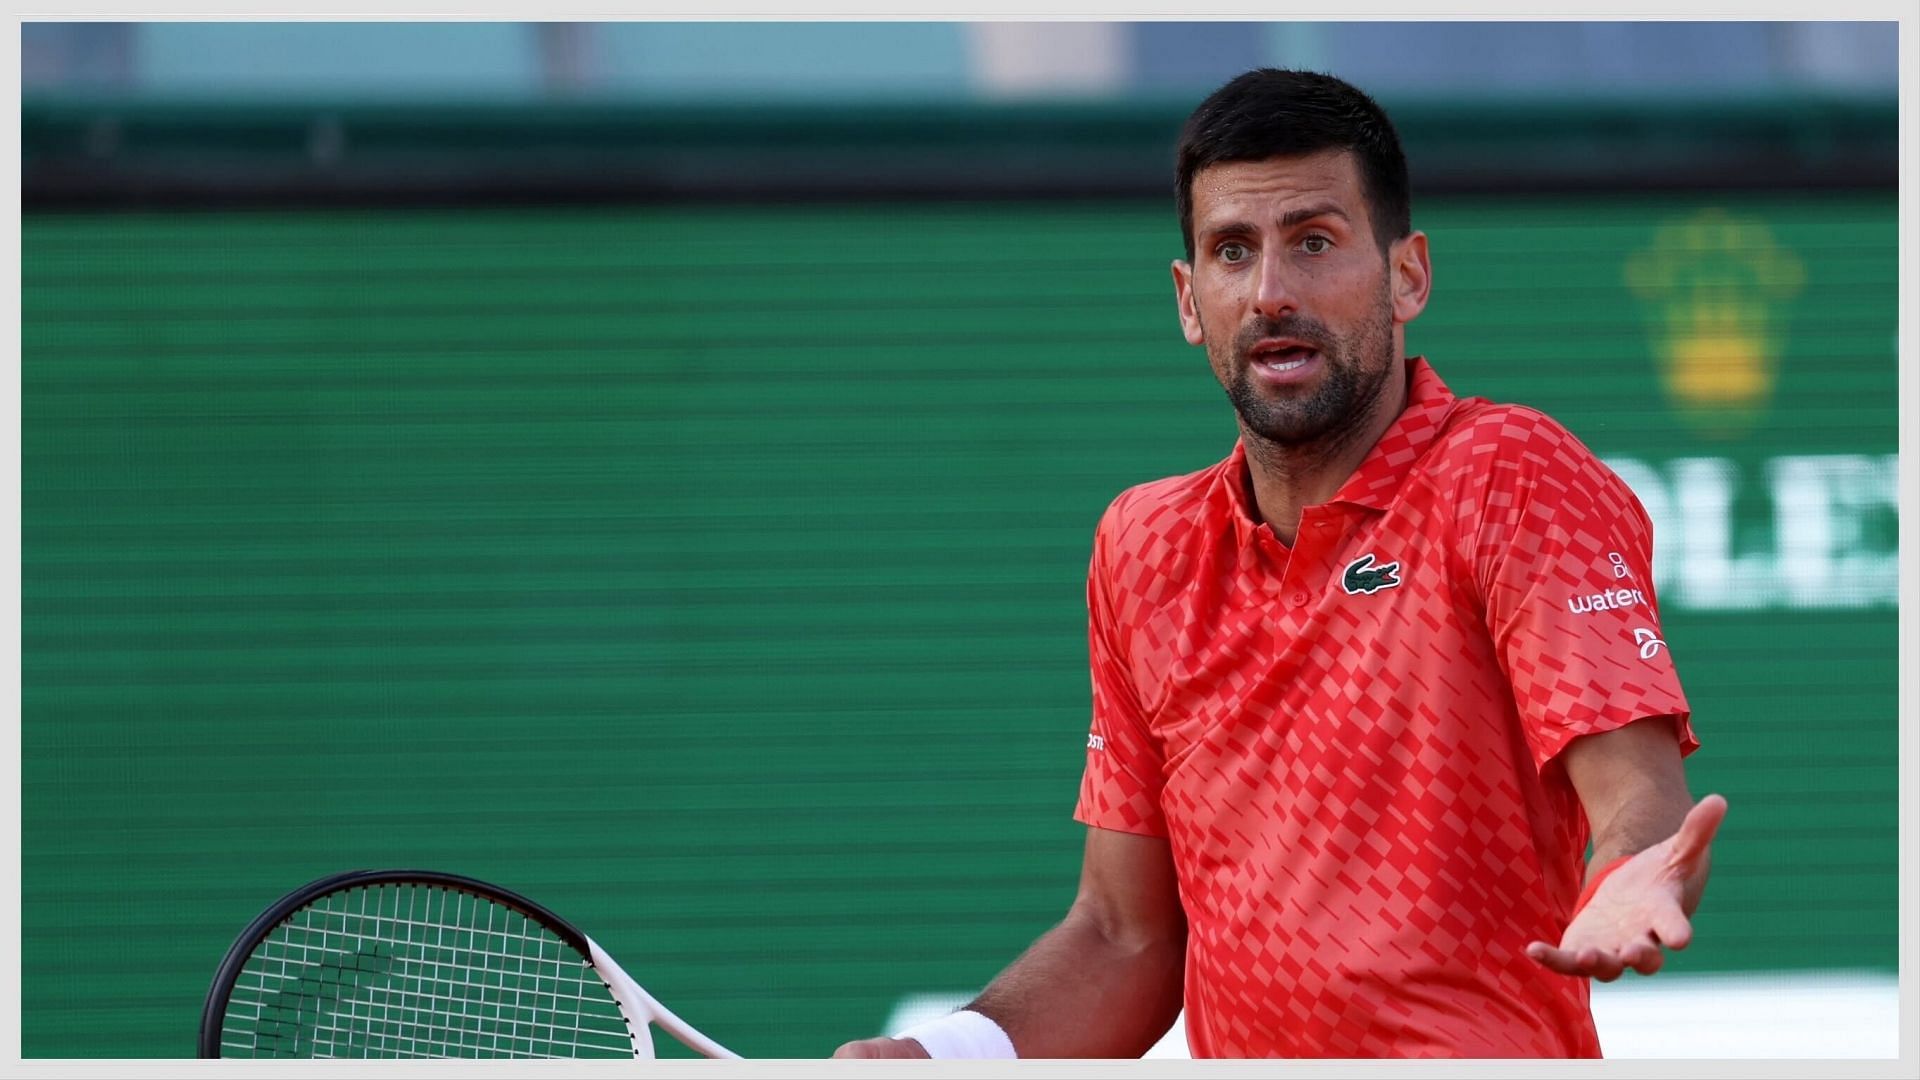 Djokovic remains one of the favorites to win the French Open